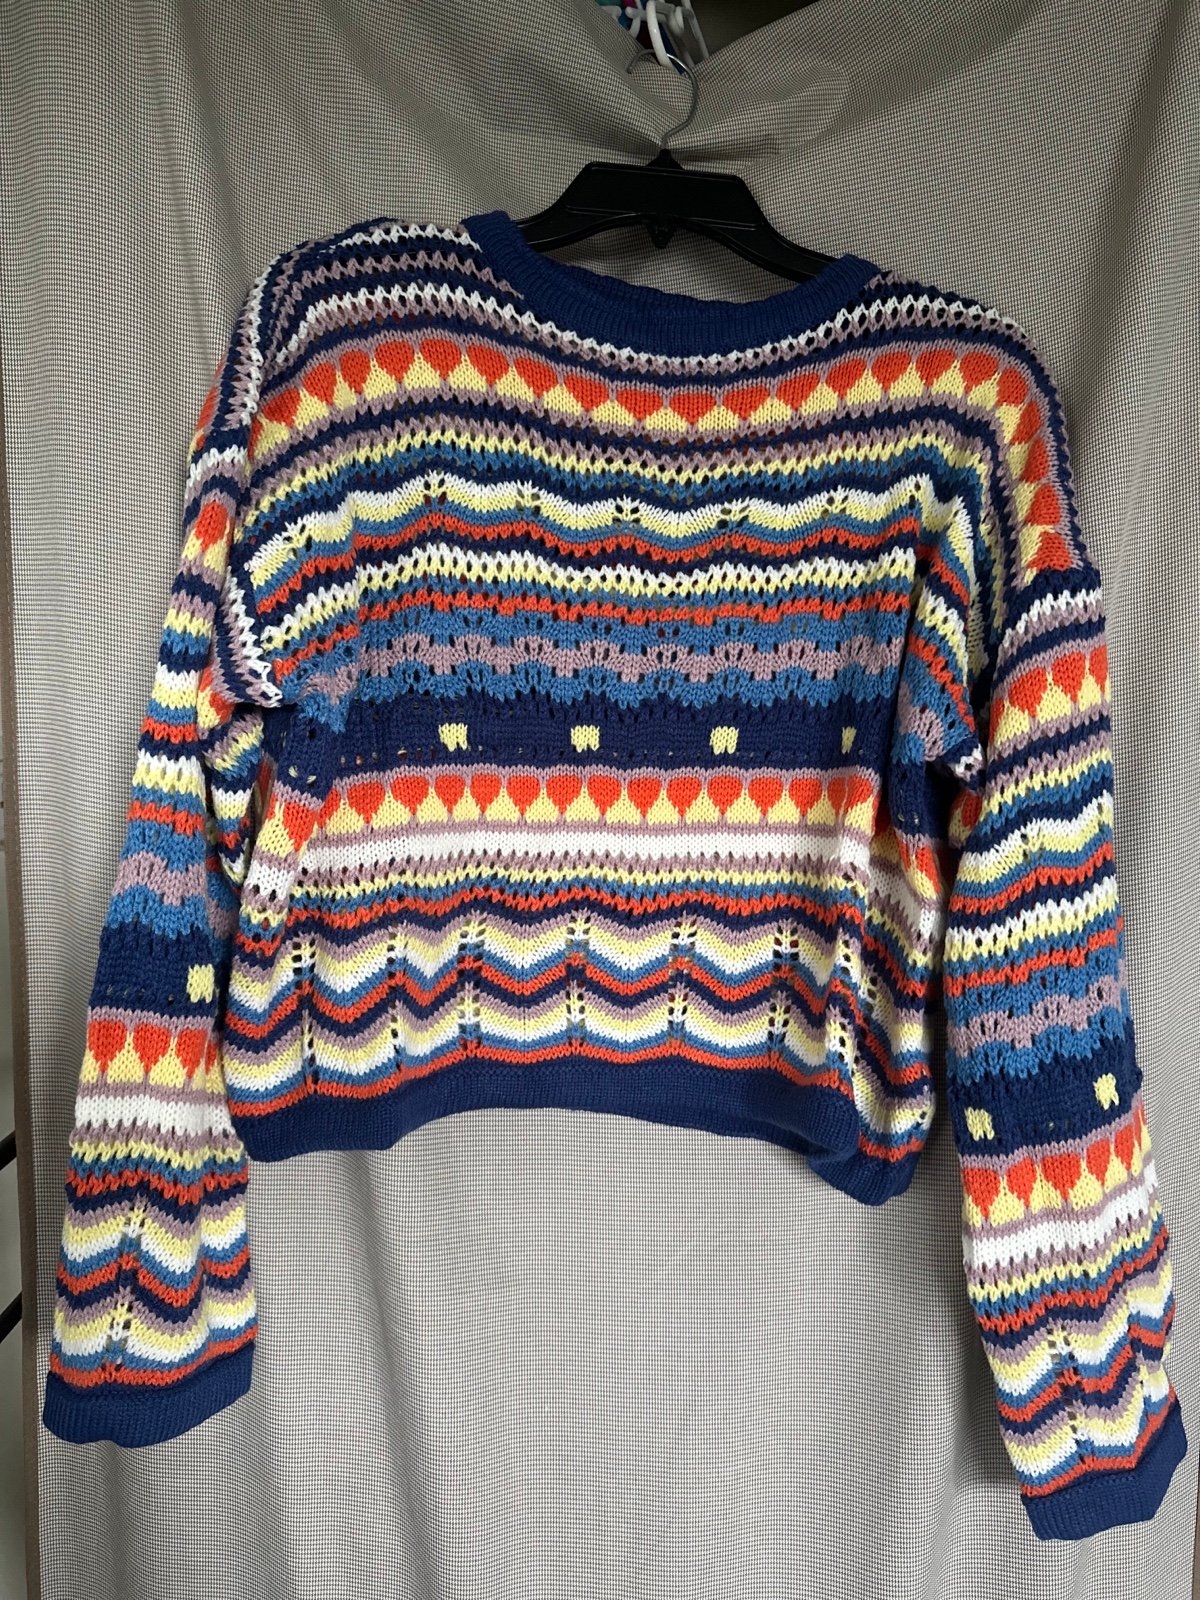 Authentic Sweater GKYLCGHVZ Cheap